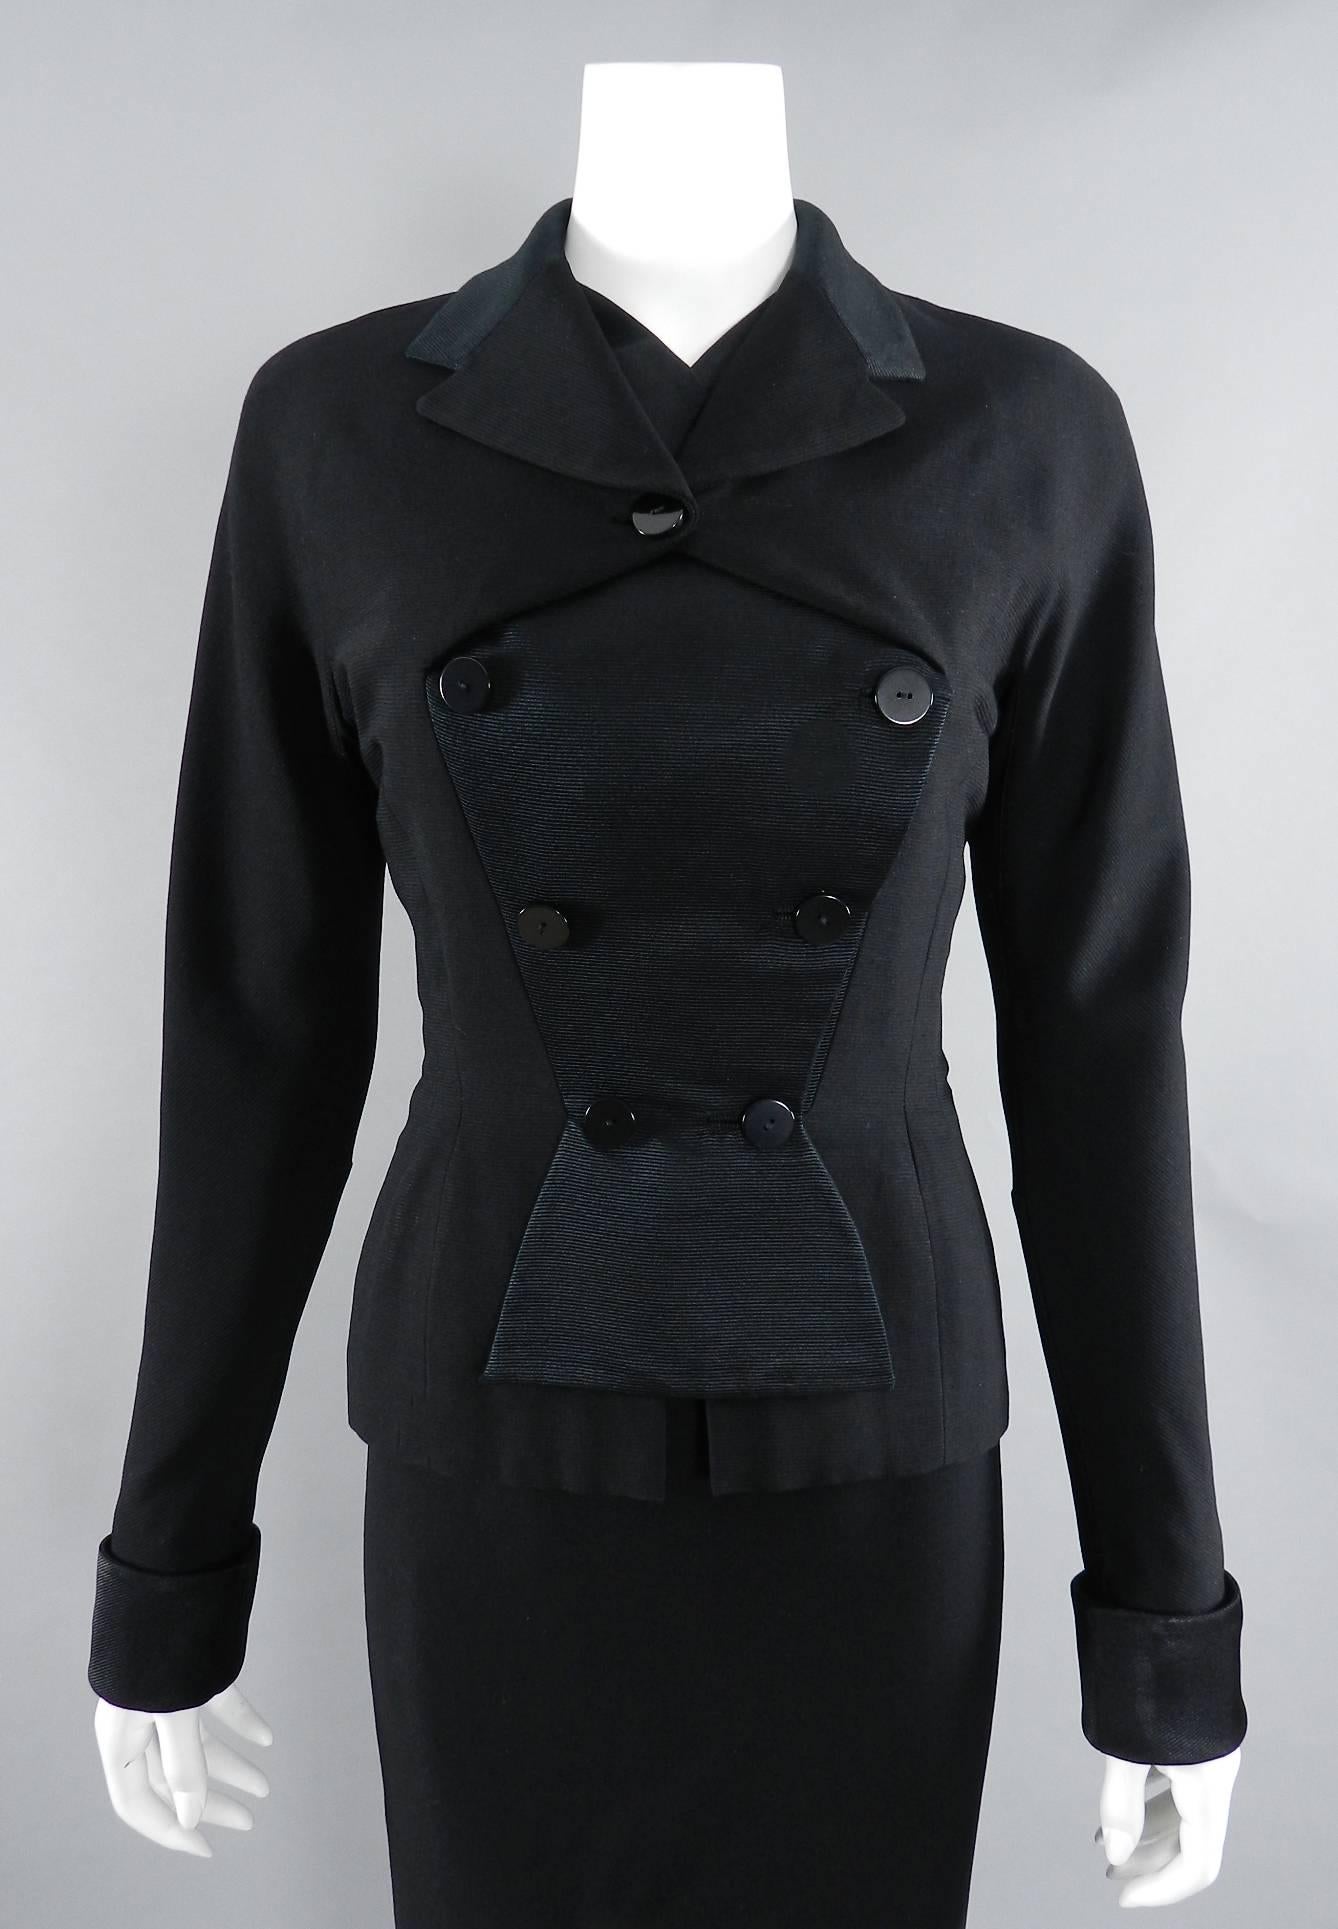 Pierre Balmain circa early 1950's skirt suit. Black finely ribbed wool with silk satin contrast. unique fold over design at front bust, french cuffs, pencil skirt with off-centre back zipper. Skirt waist 25